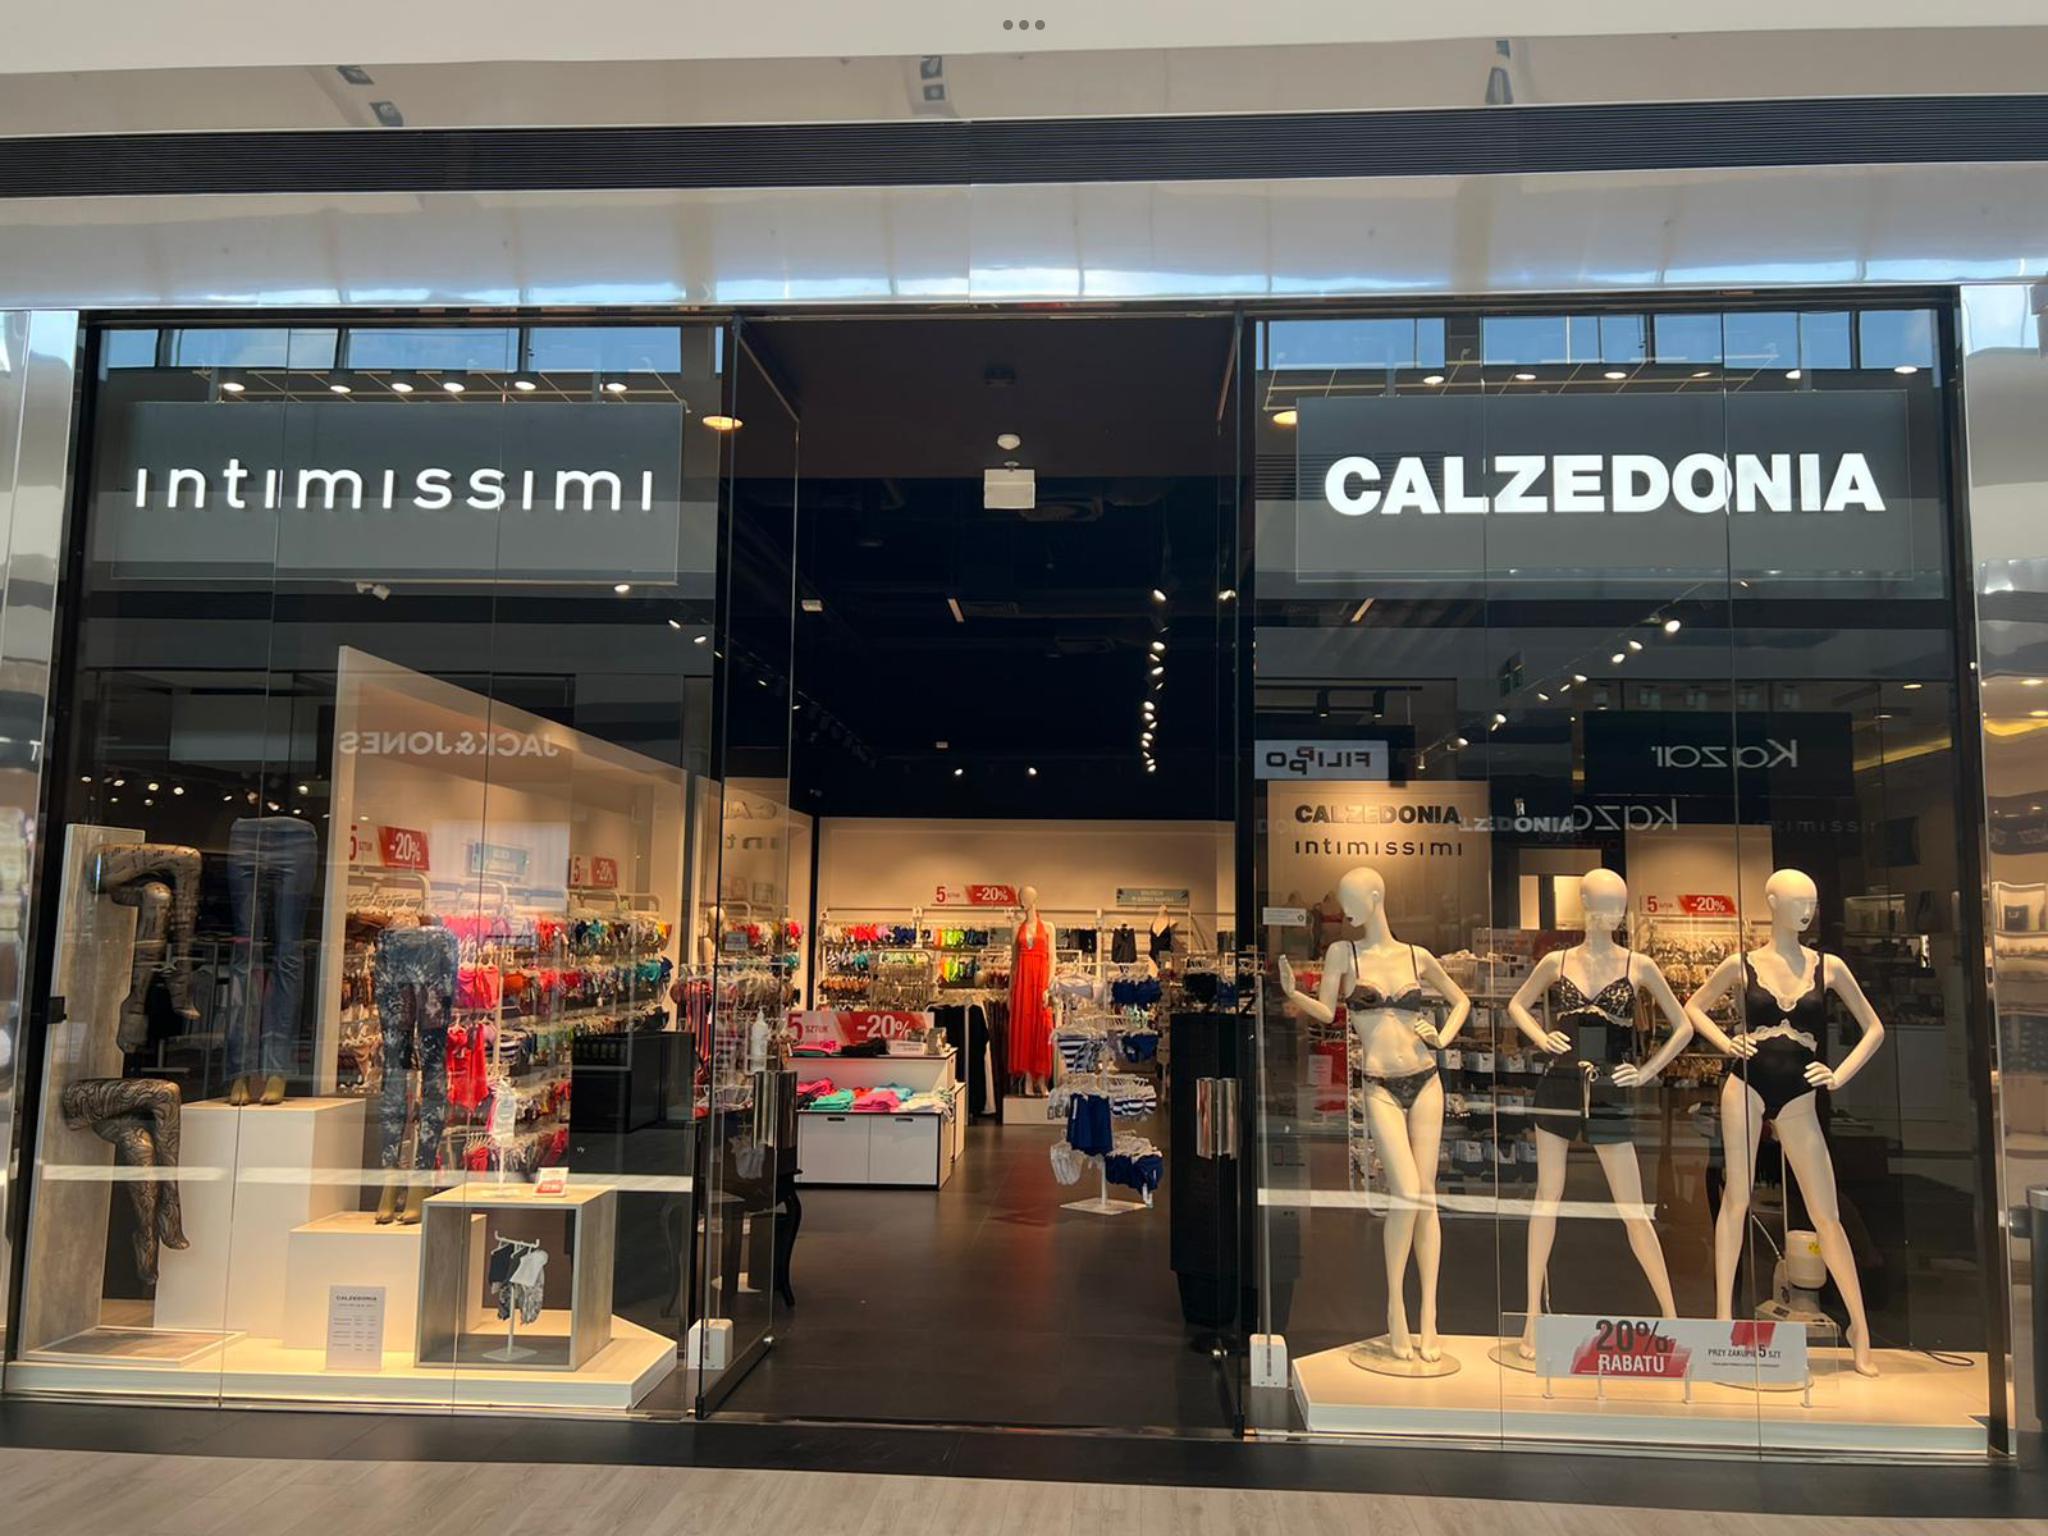 Outlet  Calzedonia - Intimissimi